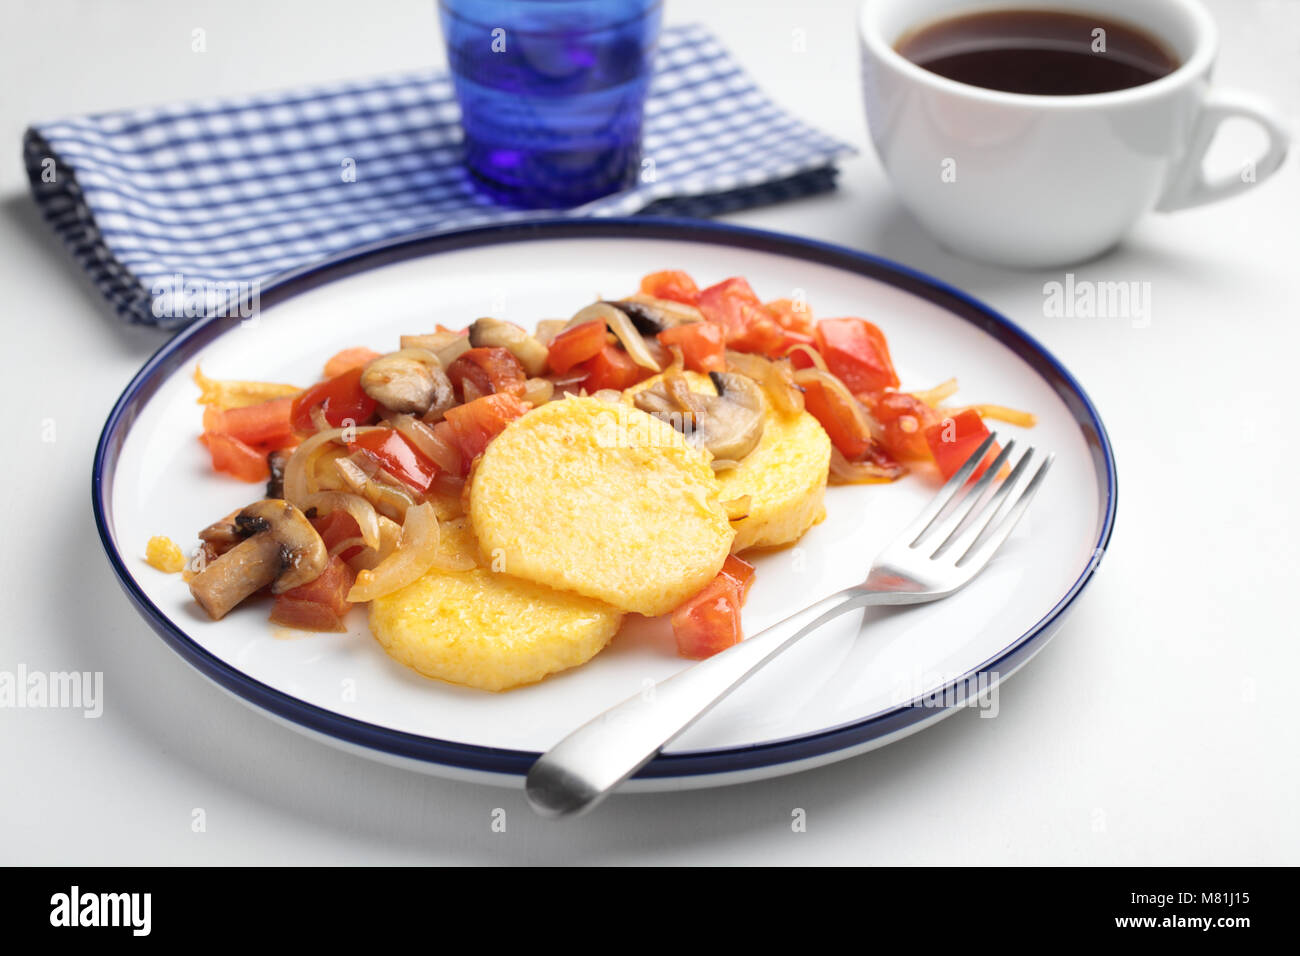 Polenta with roasted mushrooms, tomato, pepper, and onion Stock Photo